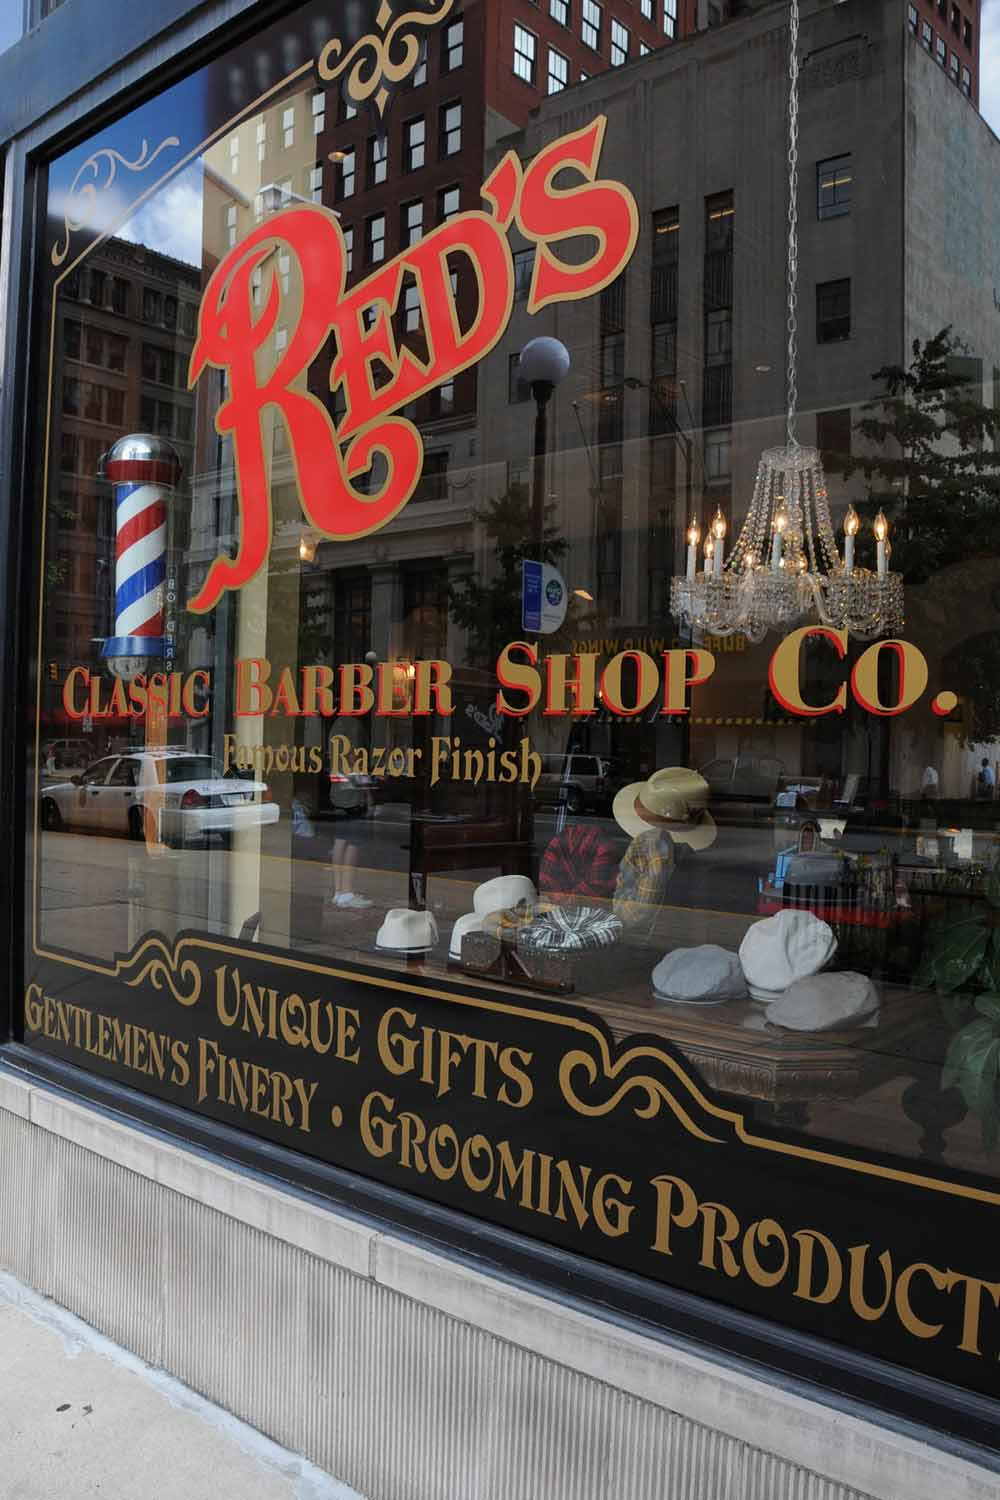 Reds Classic Barber Shop Co 2